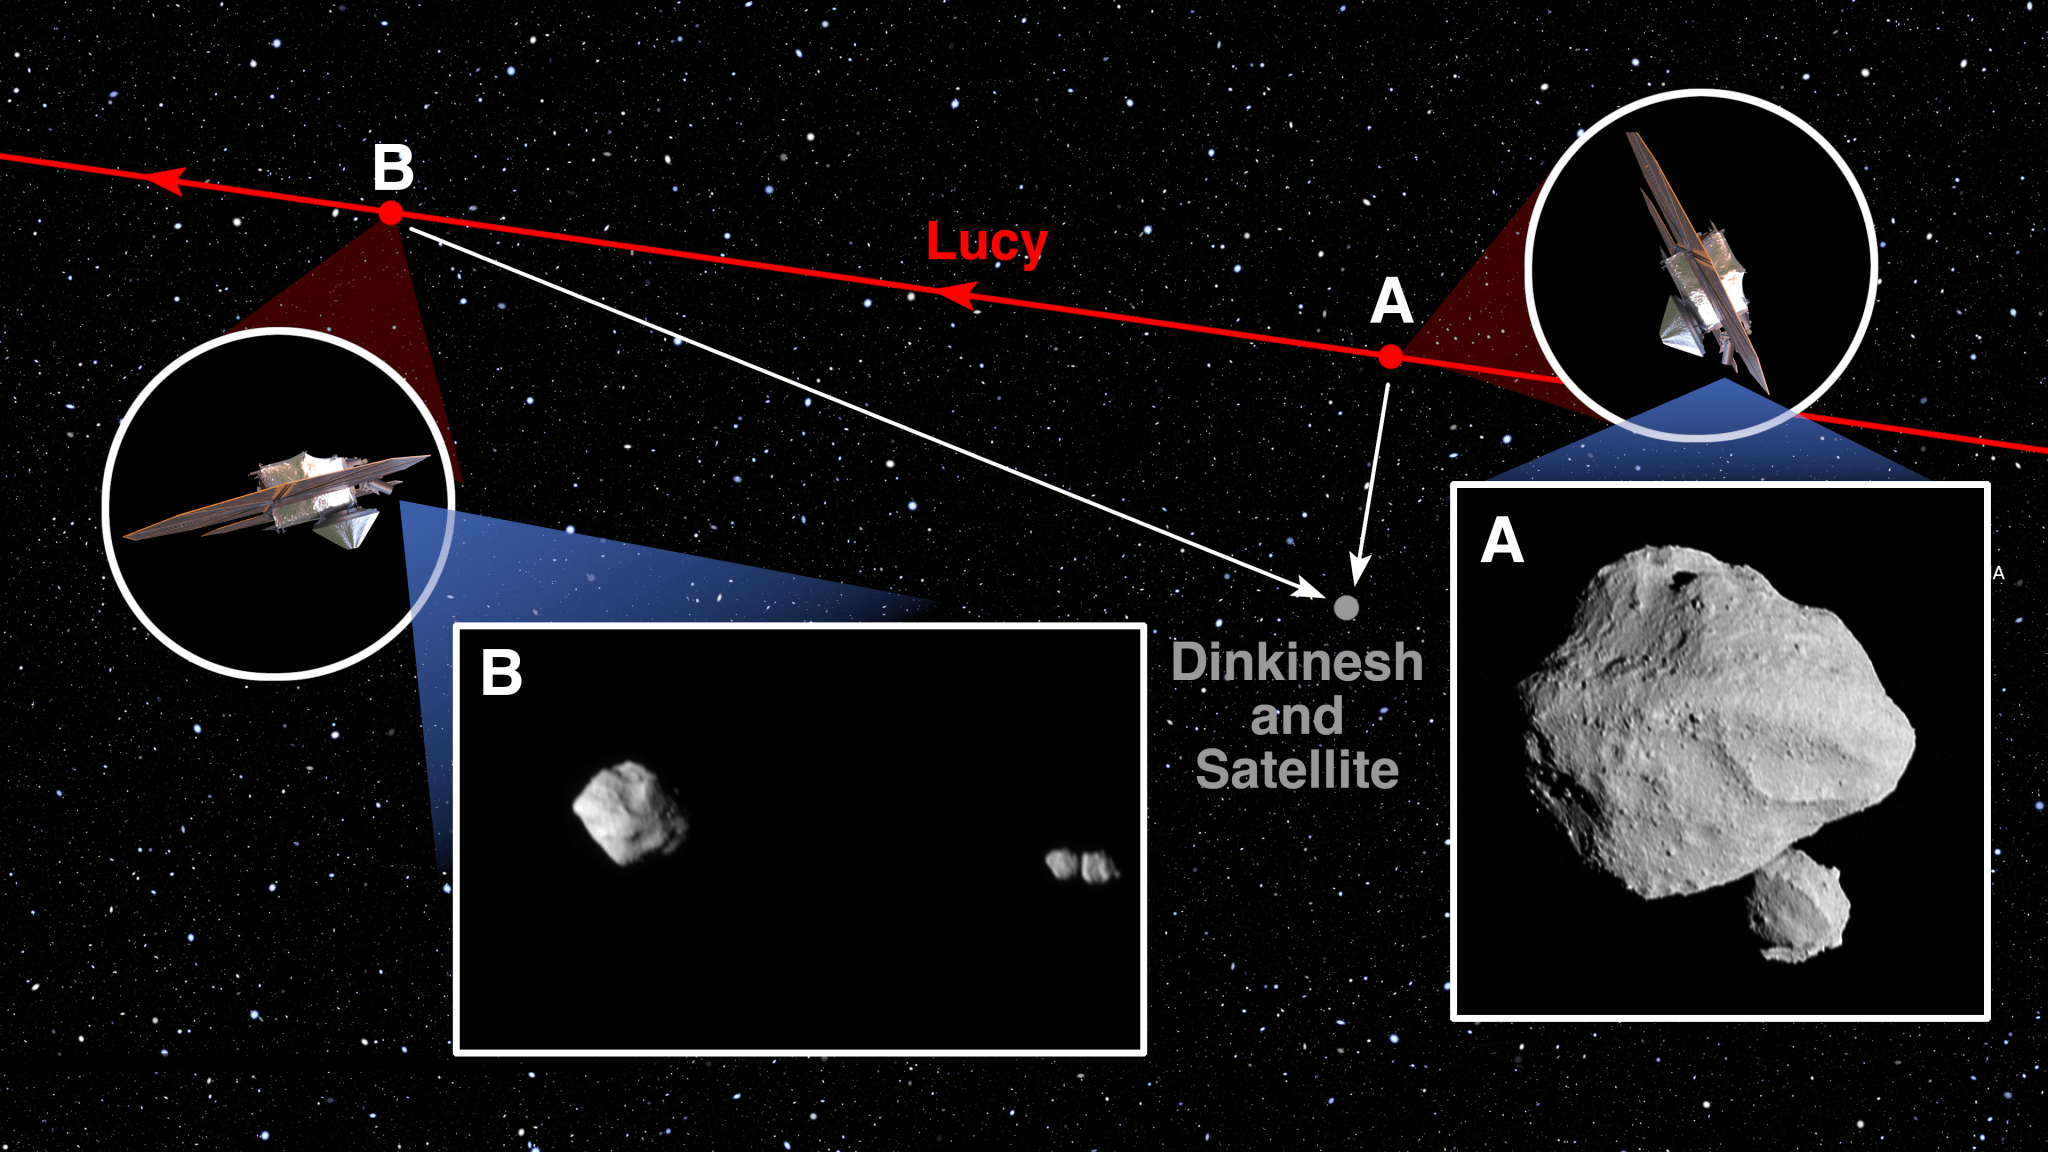 A diagram showing photographs of the asteroid Dinkinesh at two angles, as captured by NASA's Lucy spacecraft on its flyby. The spacecraft's flight path is represented by a red line that pans the top portion of the image from right to left, represented by arrow heads pointing left. There are four inset images, two show the Lucy spacecraft at different angles at point A (right) and point B (left). Point A shows the first image taken of Dinkinesh, showing the asteroid and its small satellite. Point B shows the second image taken at a different angle of Dinkinesh, now showing two small grey satellites orbiting the asteroid.